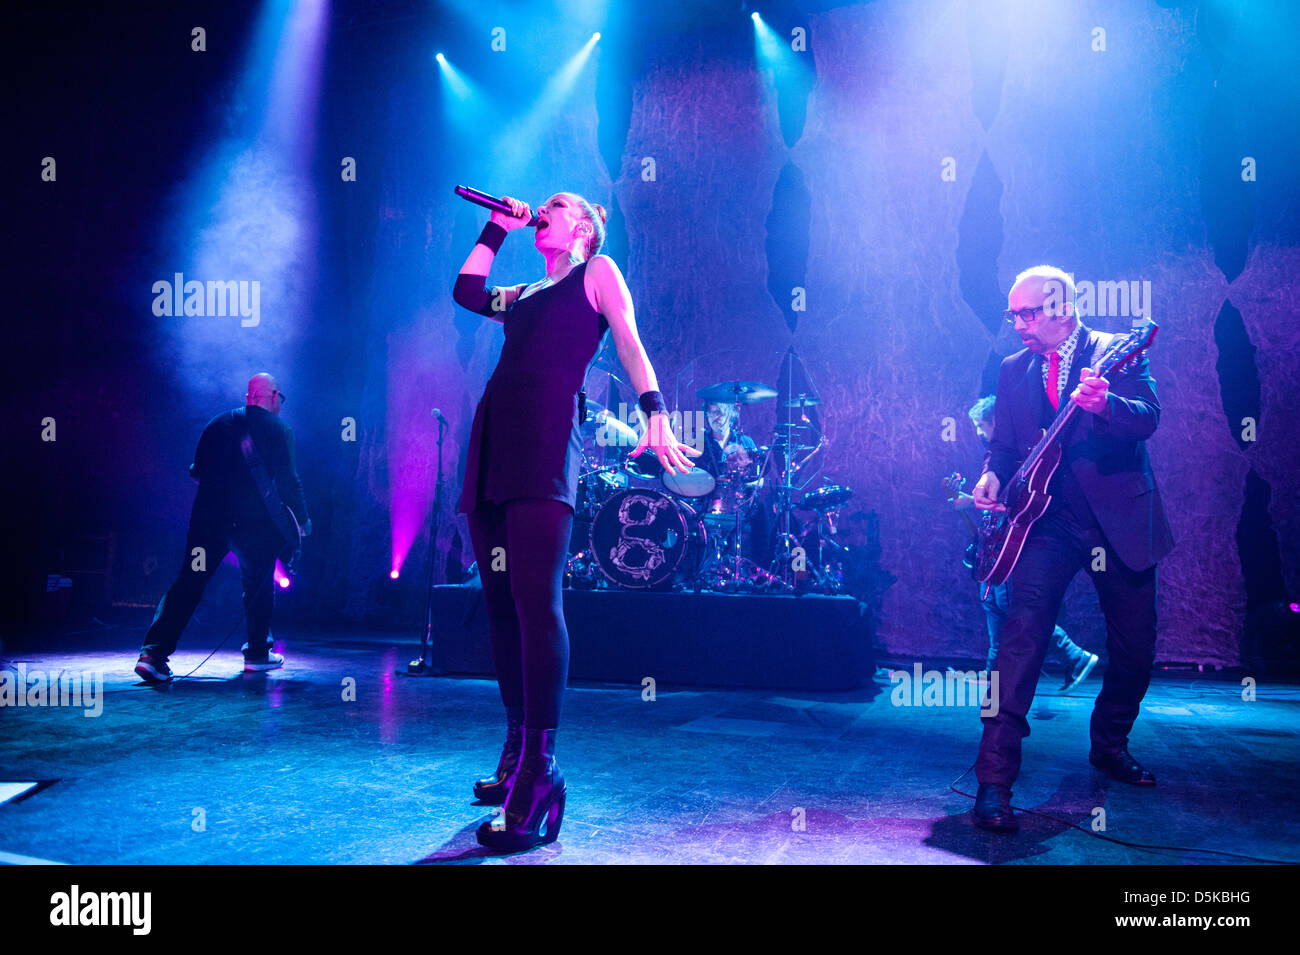 Chicago, USA. 3rd April, 2013. Alternative rock band Garbage performing at The Riviera Theatre in Chicago, USA. Credit: Max Herman/Alamy Live News Stock Photo